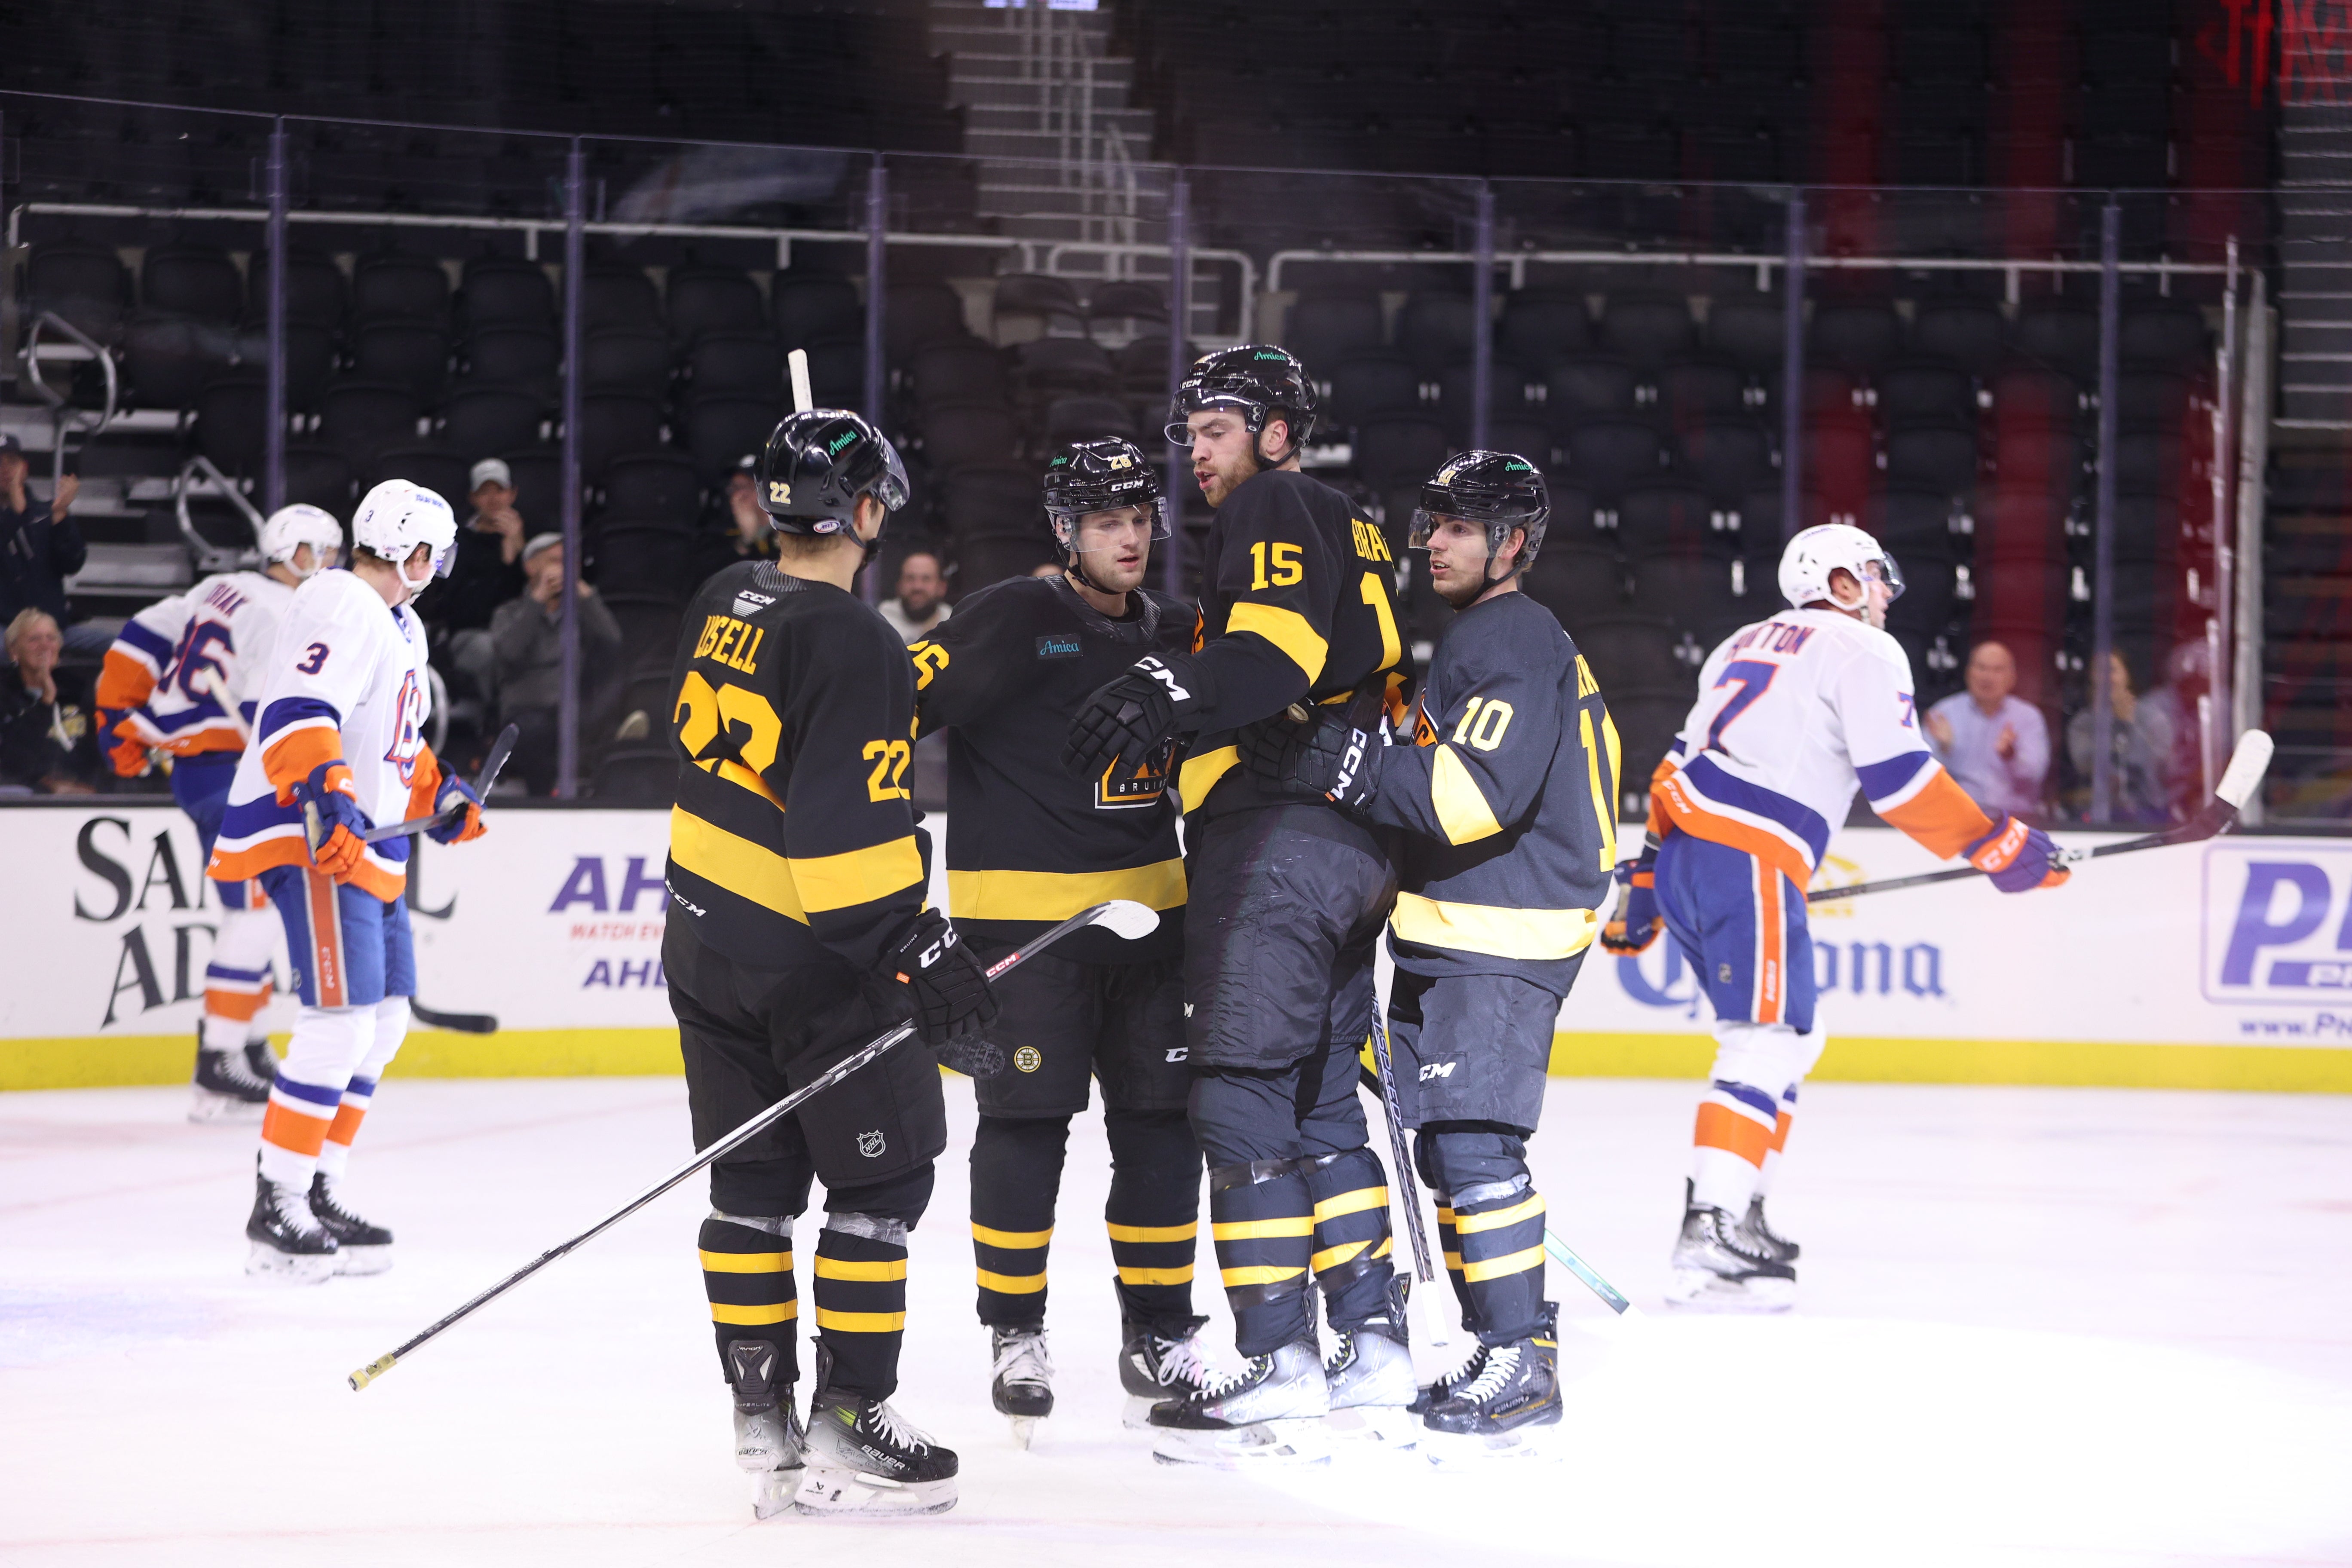 Springfield Ice-O-Topes return with a win against Bridgeport Islanders